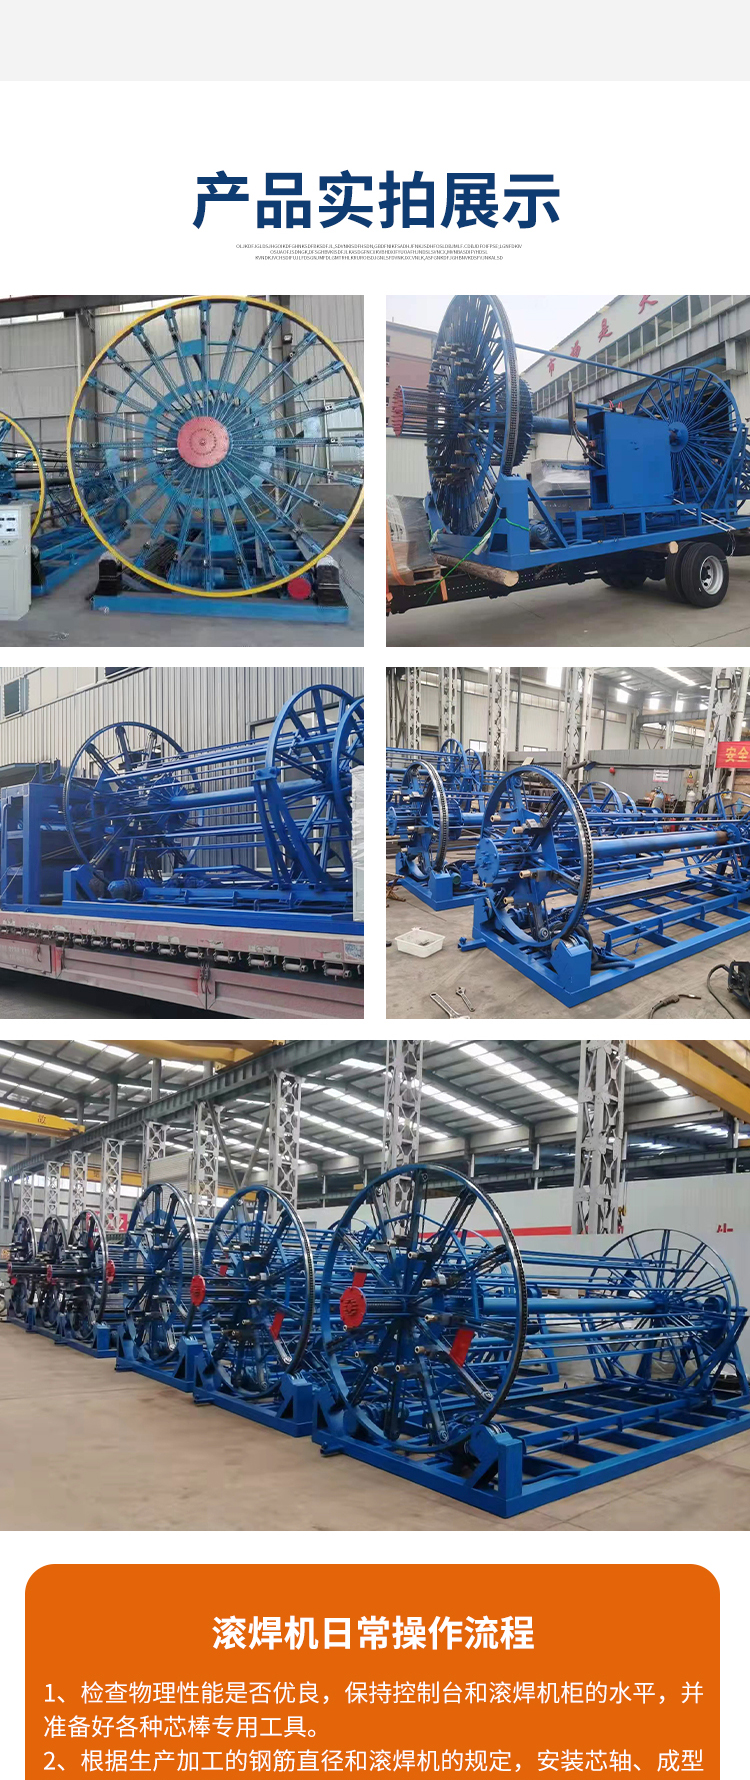 Roller welding machine CNC steel bar bending center cement pipe production line steel bar cage equipment fully automatic welding